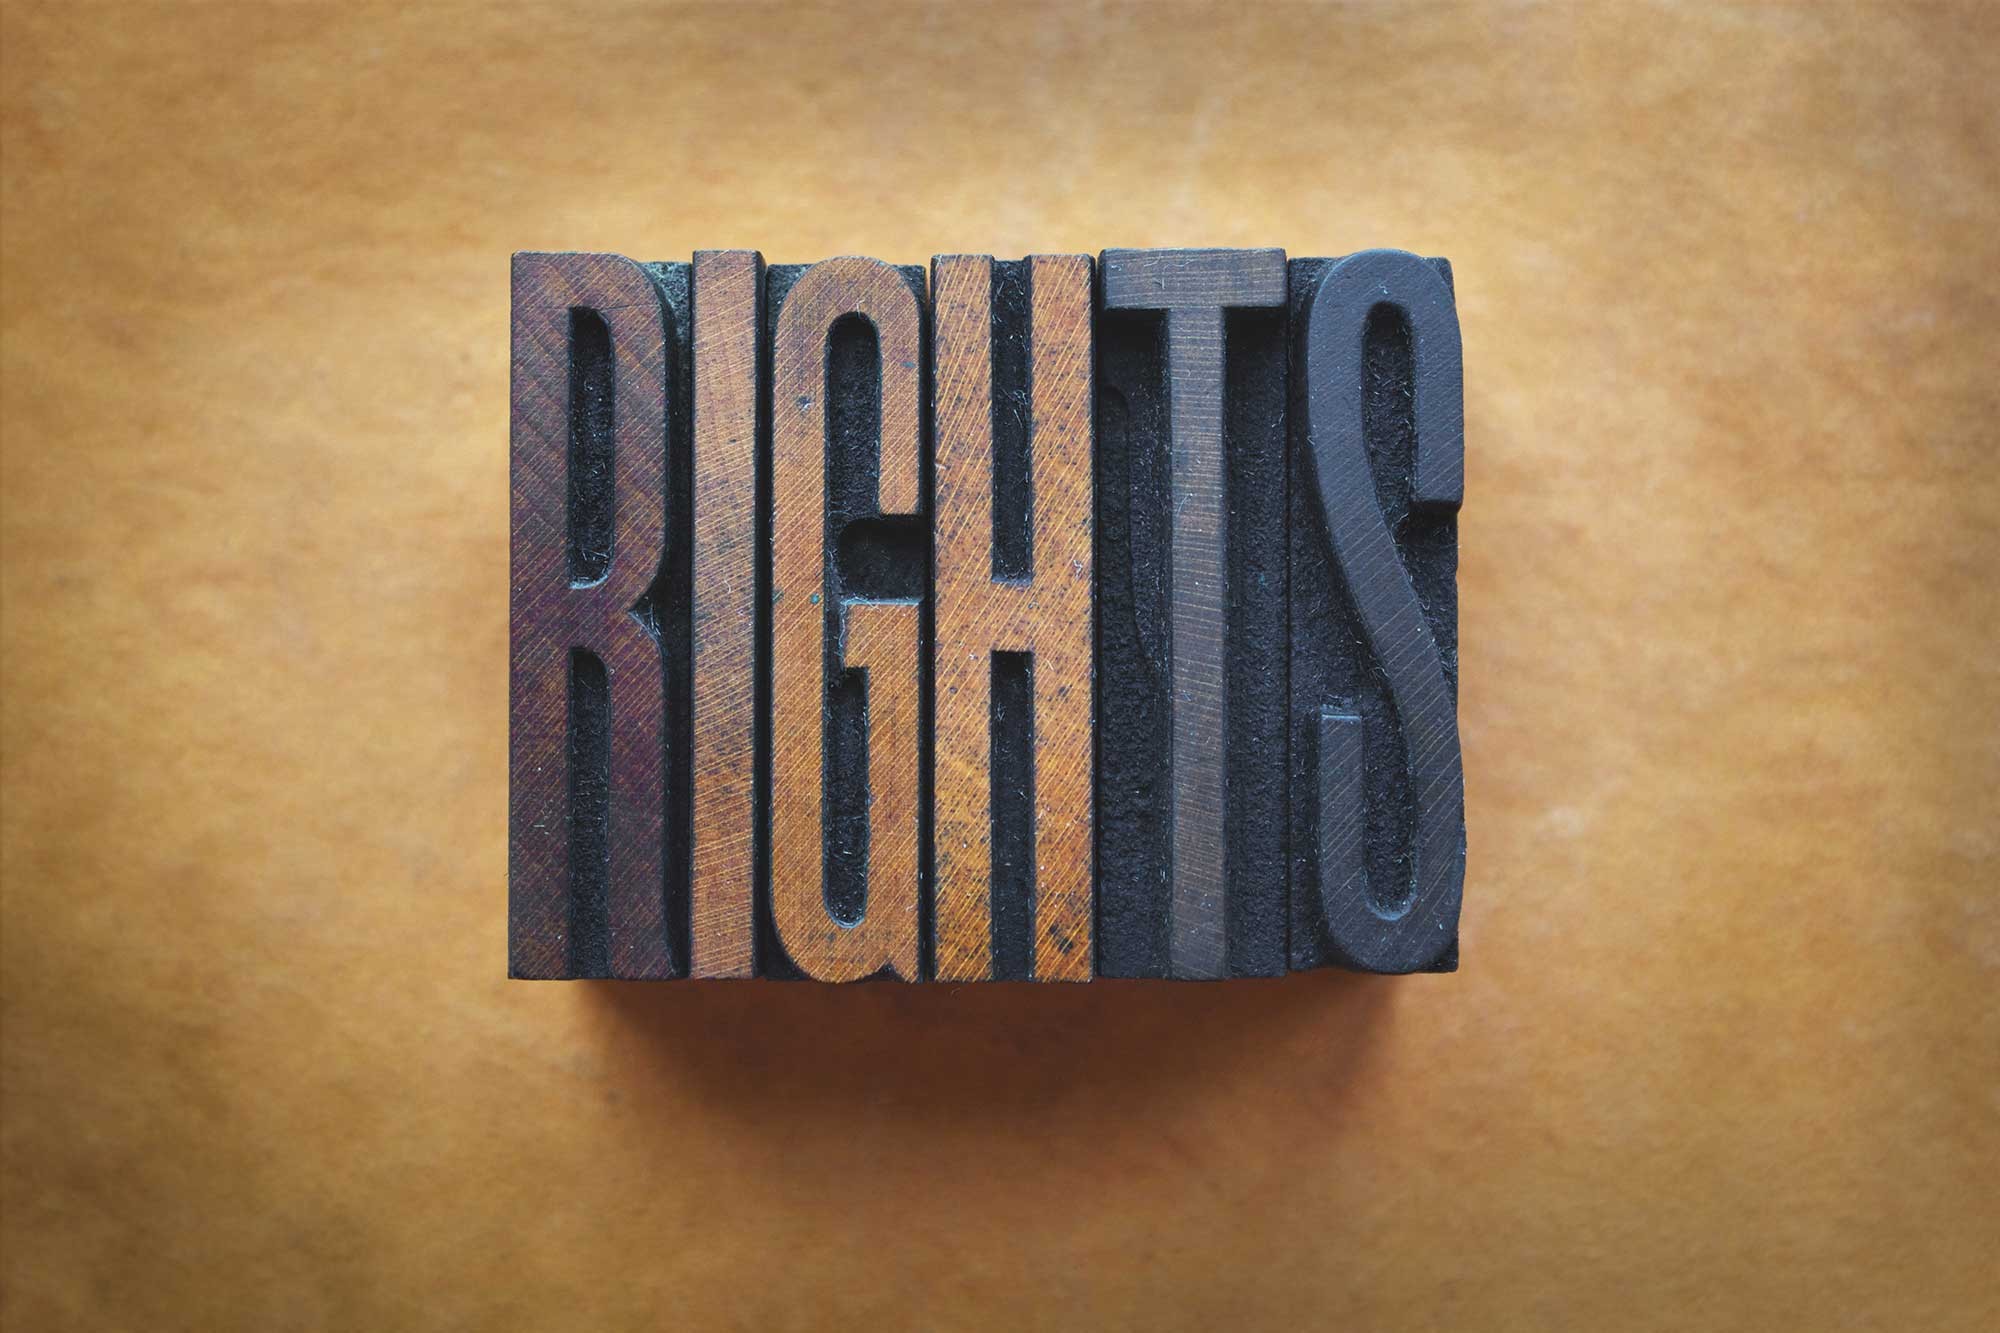 the word “rights” carved out of wood painted in hues of brown tan and blue